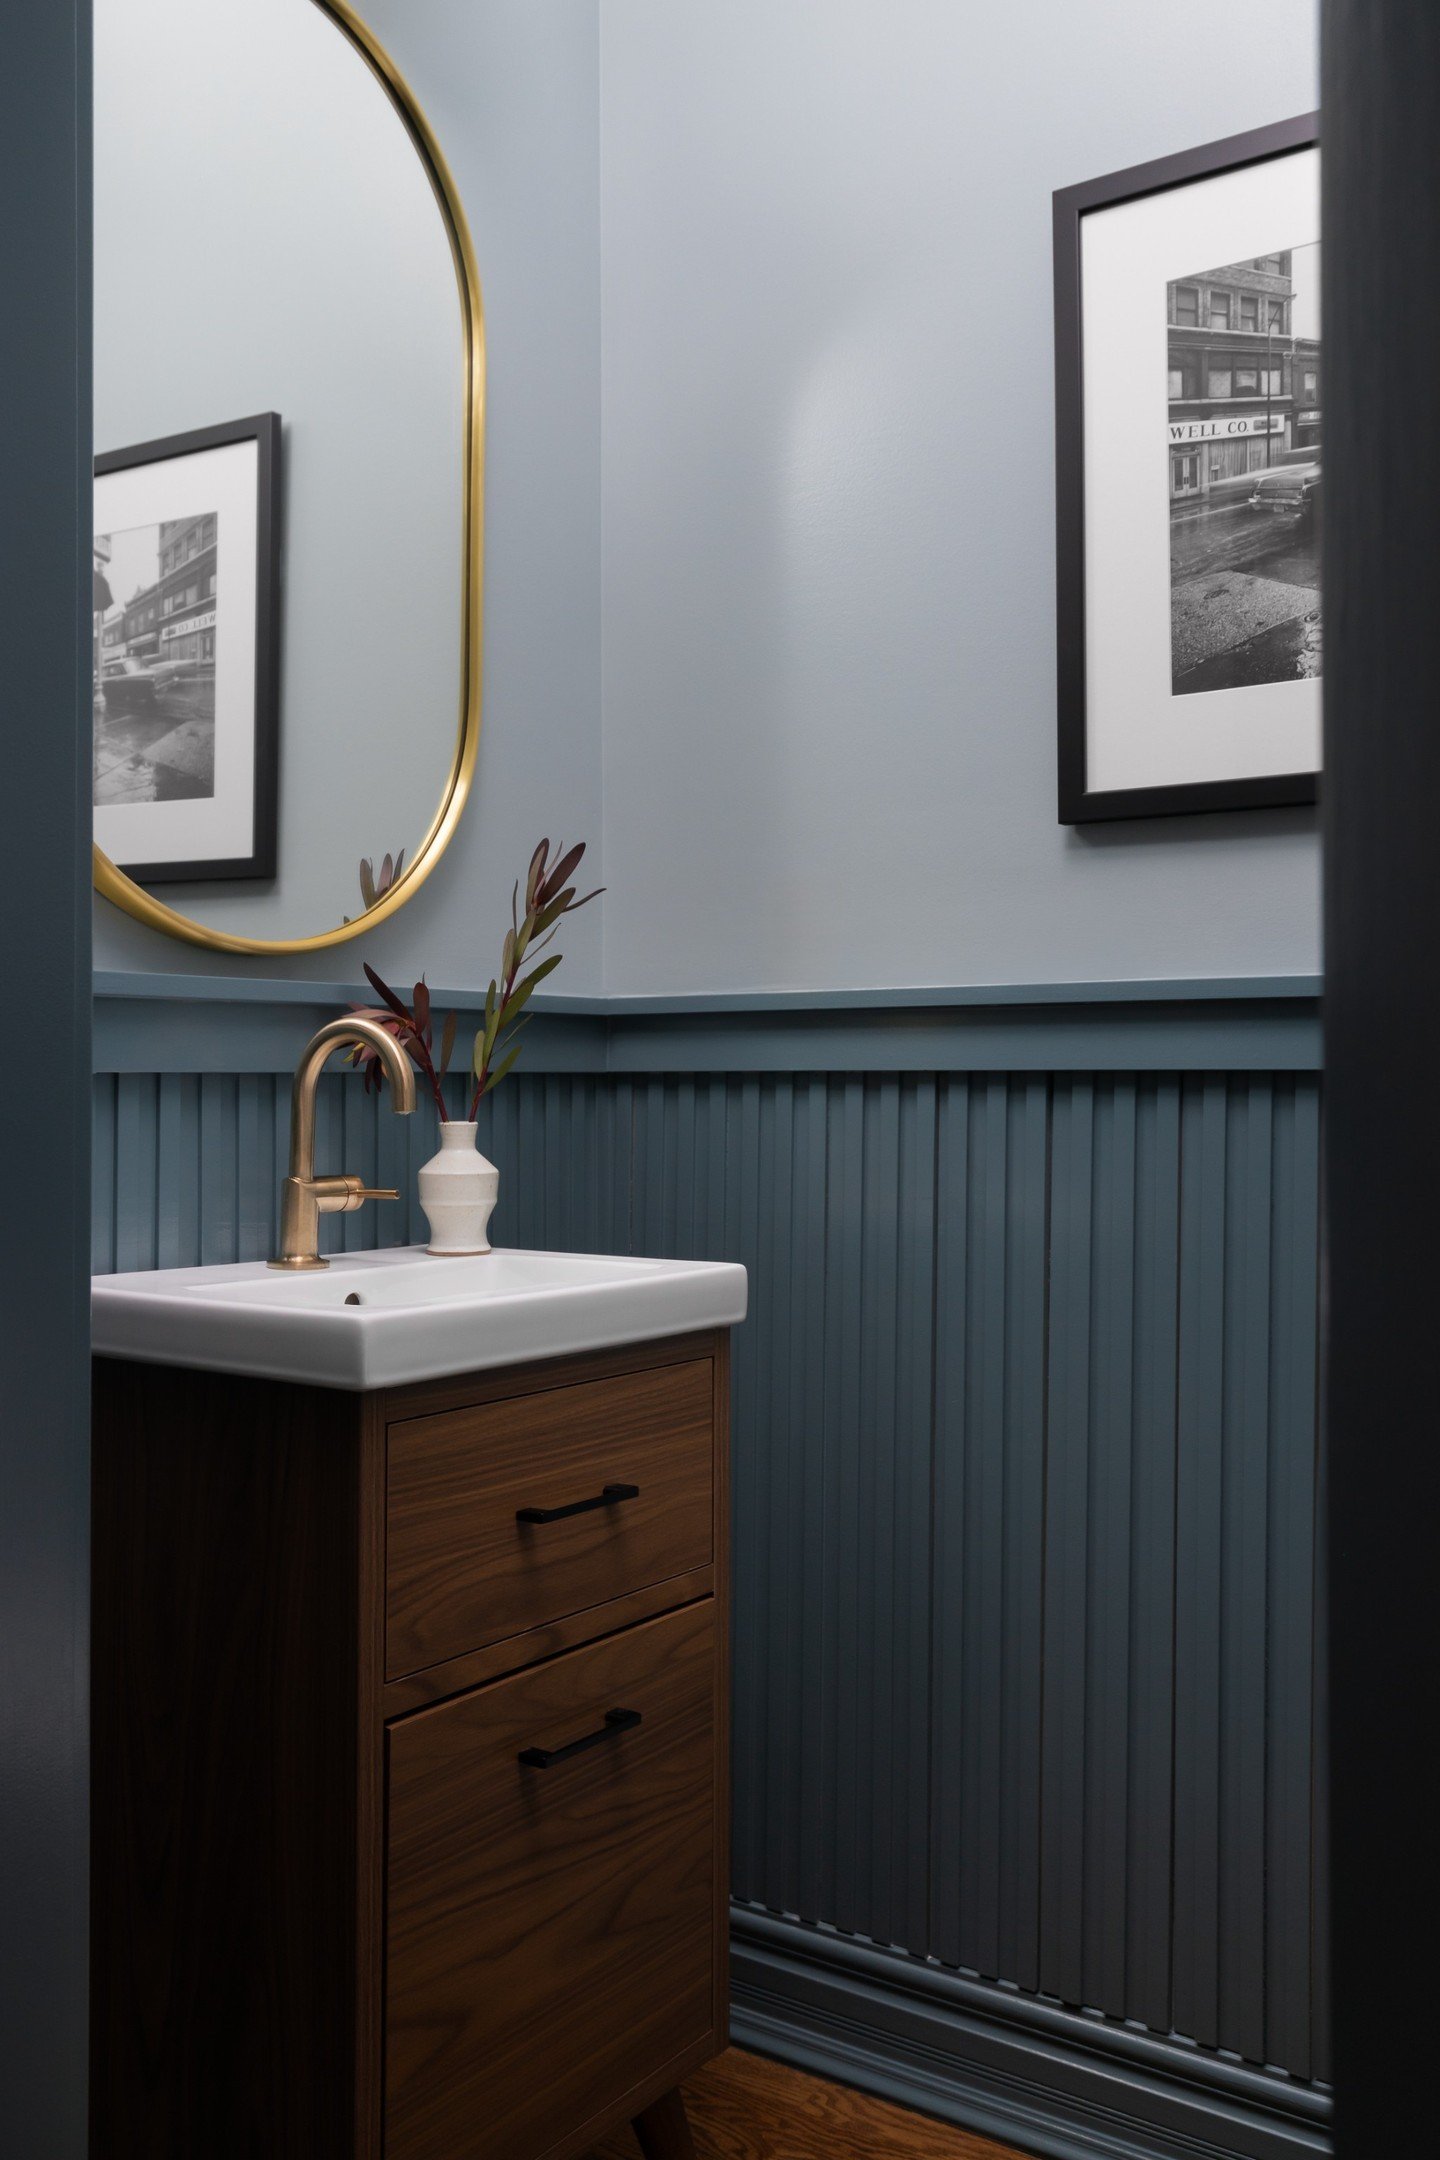 Wainscot kits are a great way to add some texture to your walls. Danielle and Michael used our Kessler Wainscot kit in this beautiful bathroom. Check out our other profiles below.
-
https://www.ornamental.com/wainscot-kits
-
📷 @clarkandaldine
-
#Orn